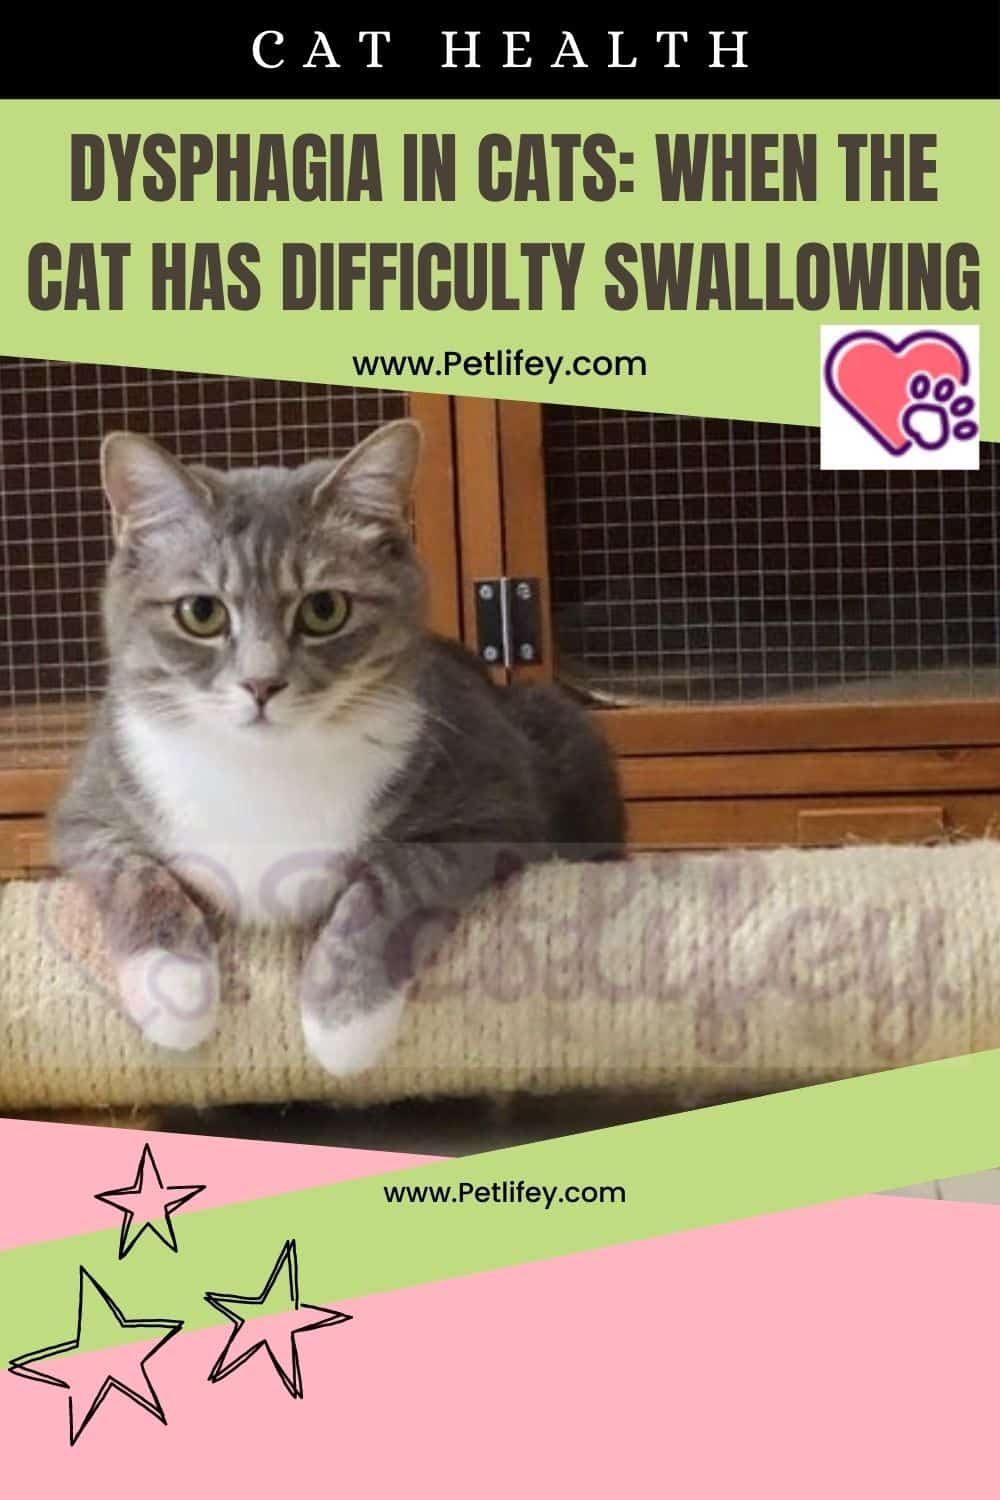 Dysphagia in Cats: when the cat has difficulty swallowing